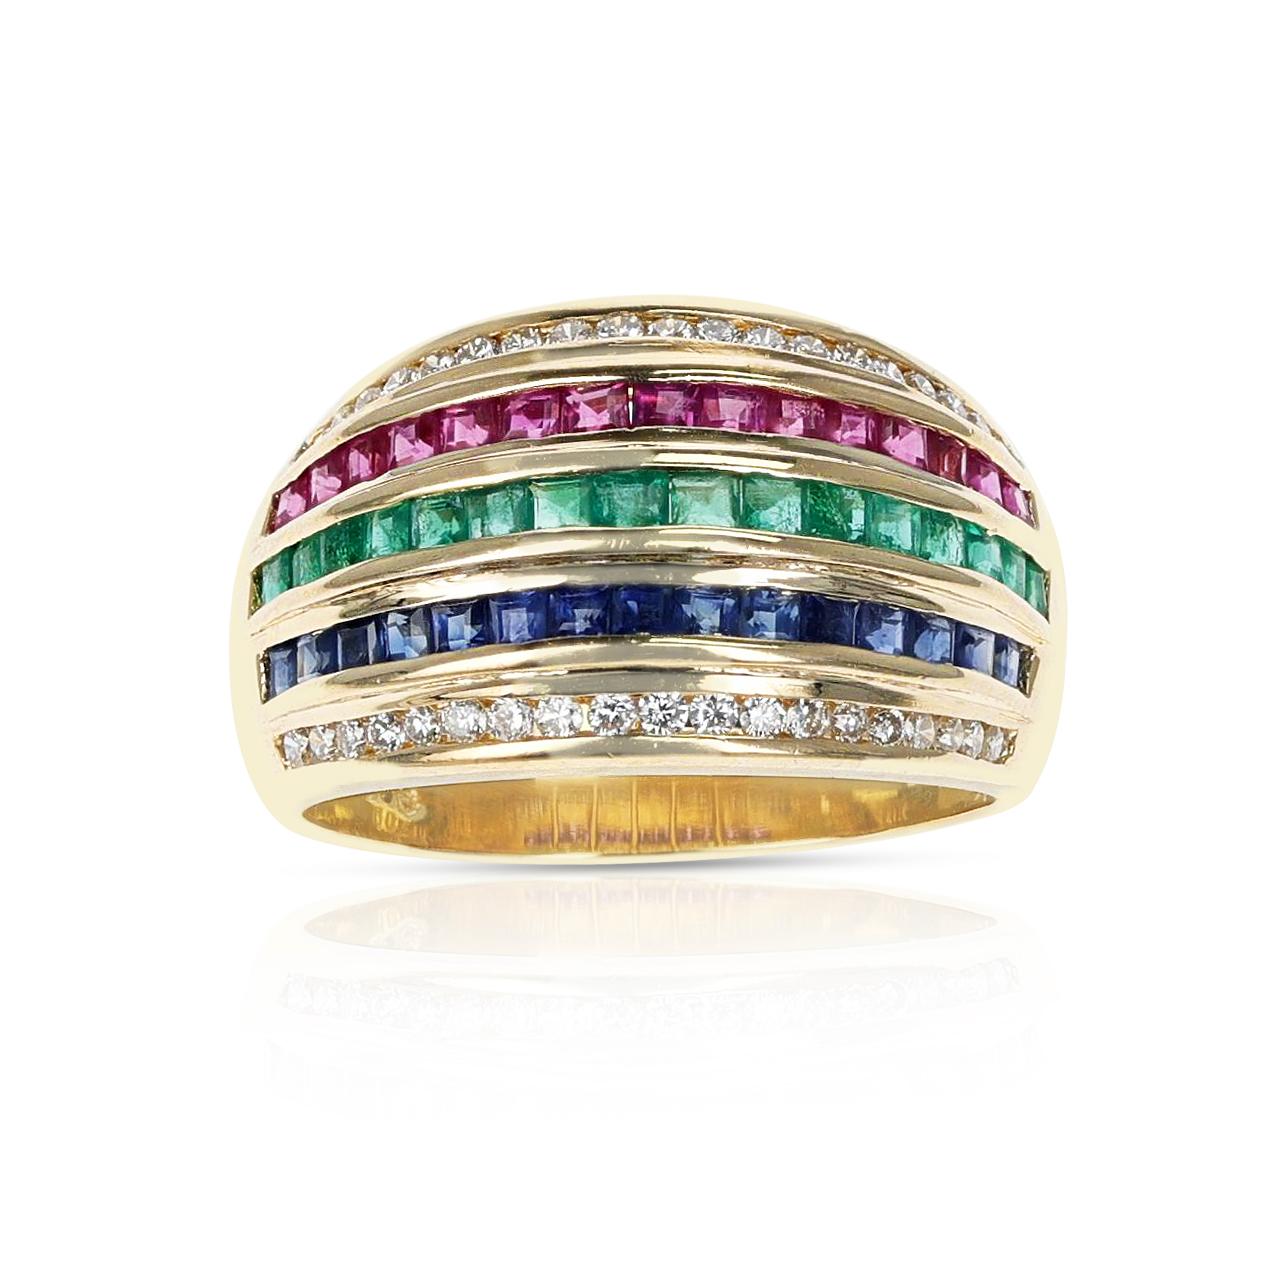 A Five Row Diamond, Blue Sapphire, Emerald, Ruby Invisibly Set Cocktail Ring made in 18 Karat Yellow Gold. The ring size is US 6.25. The total weight of the ring is 6.60 grams. 